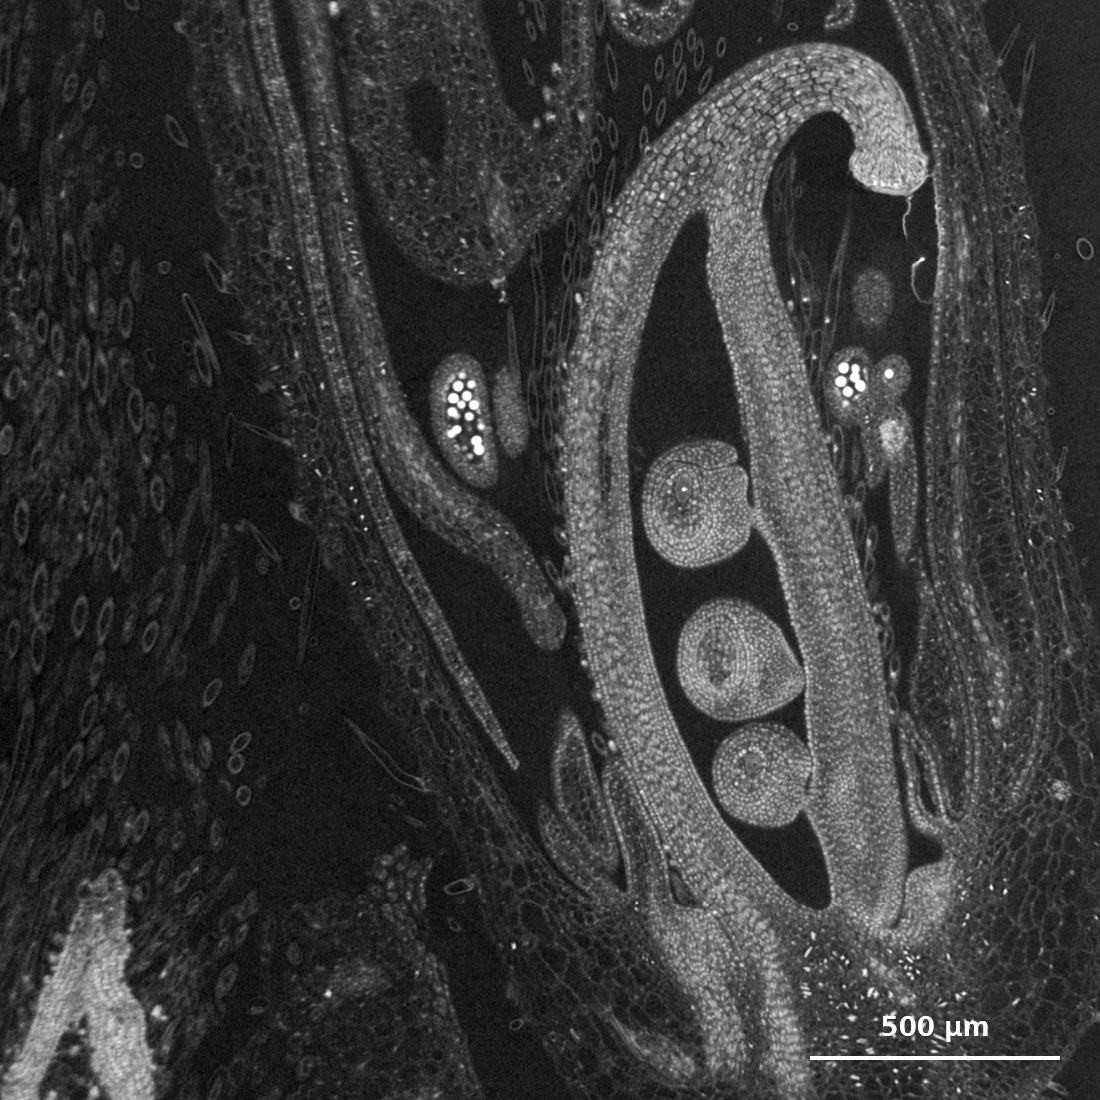 Soybean developing floral complex imaged with the ZEISS Xradia Versa X-ray microscope showing the ovary with developing ovules surrounded by the anthers containing bright pollen grains.